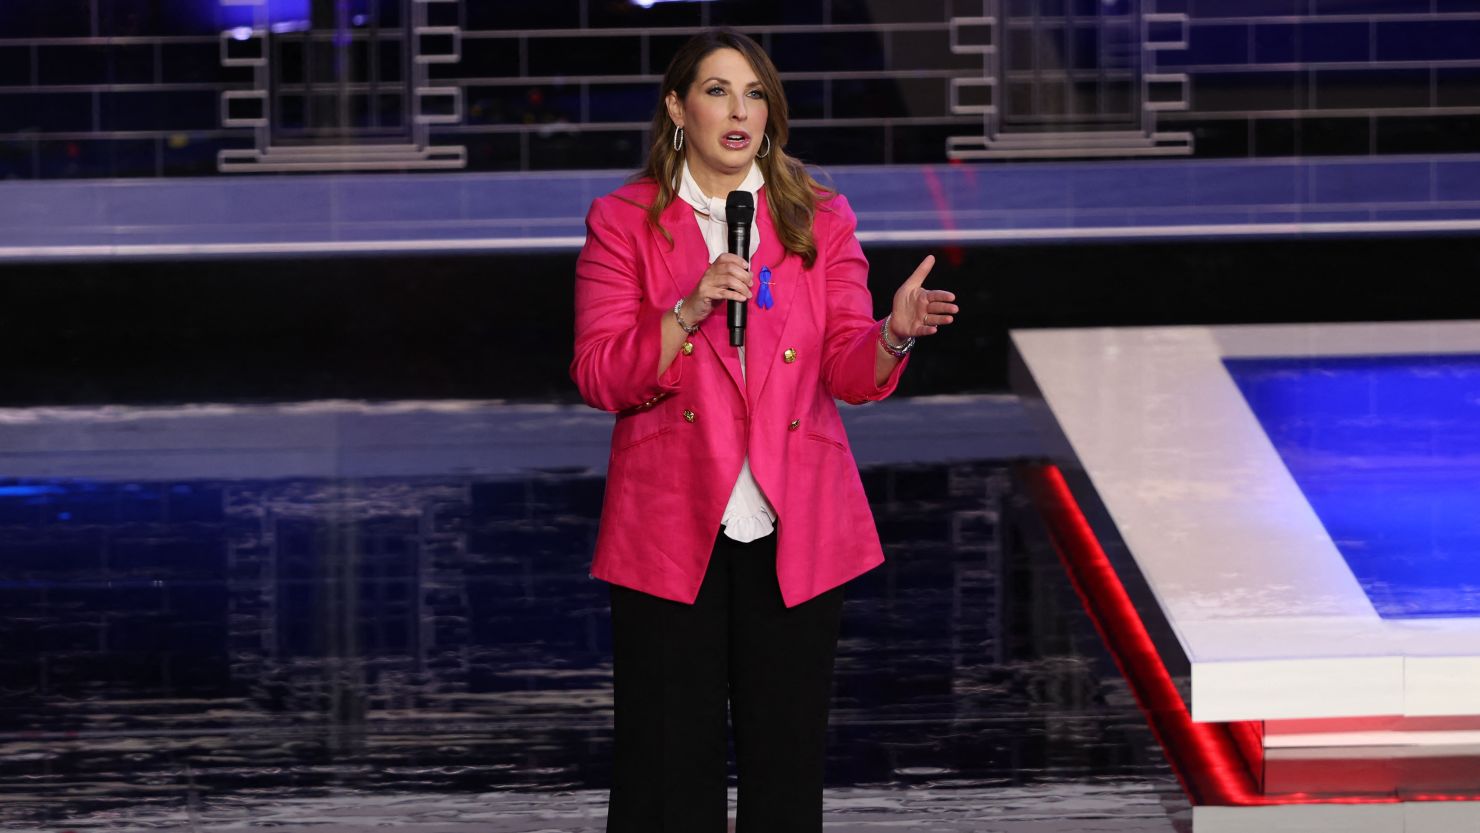 Ronna McDaniel speaks to the audience at the third Republican candidates' US presidential debate of the 2024 US presidential campaign hosted by NBC News at the Adrienne Arsht Center for the Performing Arts in Miami, Florida, US, November 8, 2023.